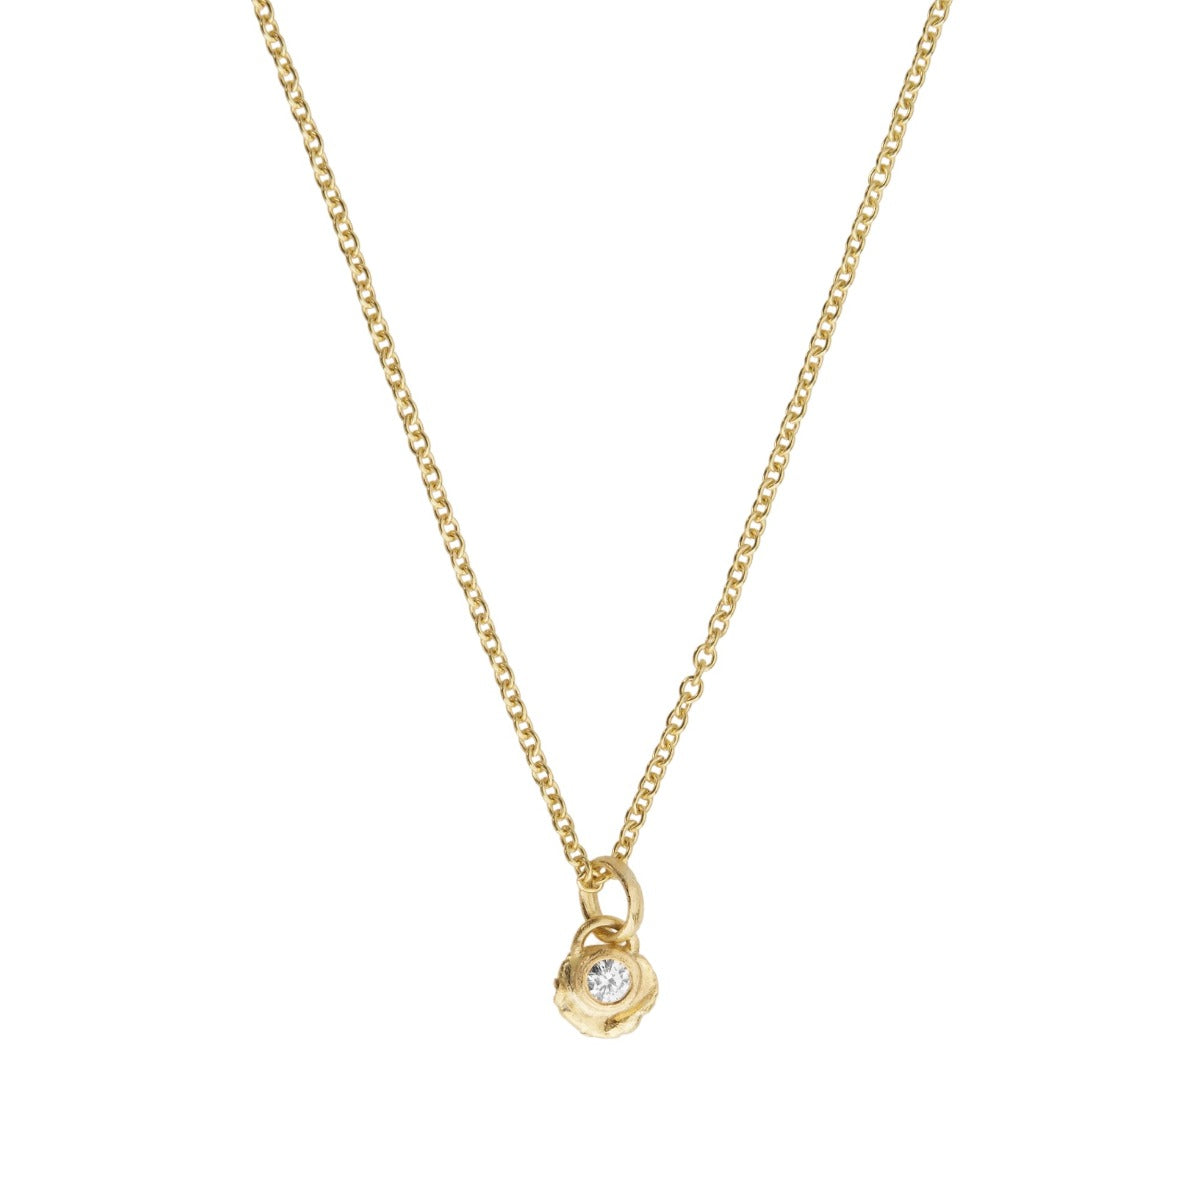 Lava necklace, pendant with diamond and gold chain in 18 kt. gold